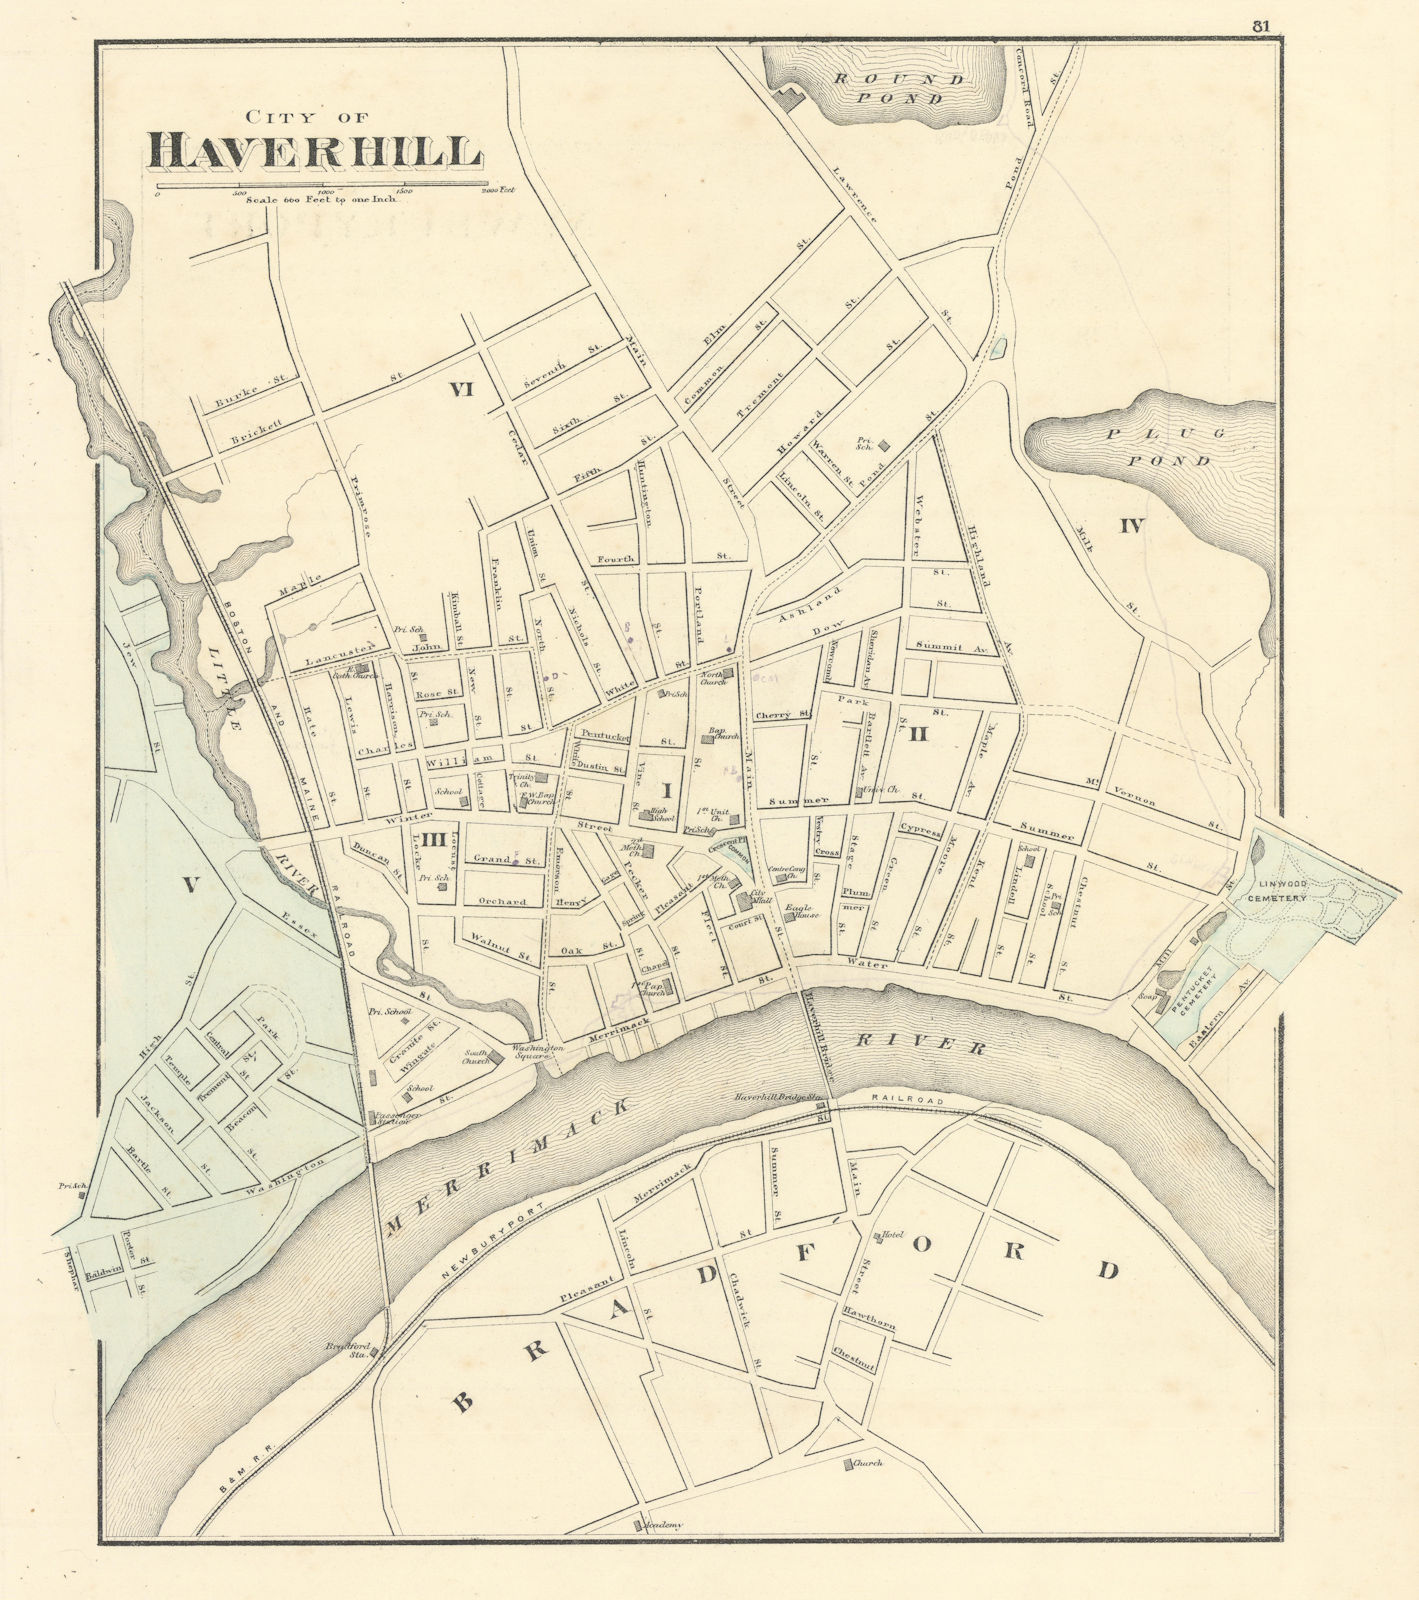 City of Haverhill, Massachusetts. Town plan. WALLING & GRAY 1871 old map